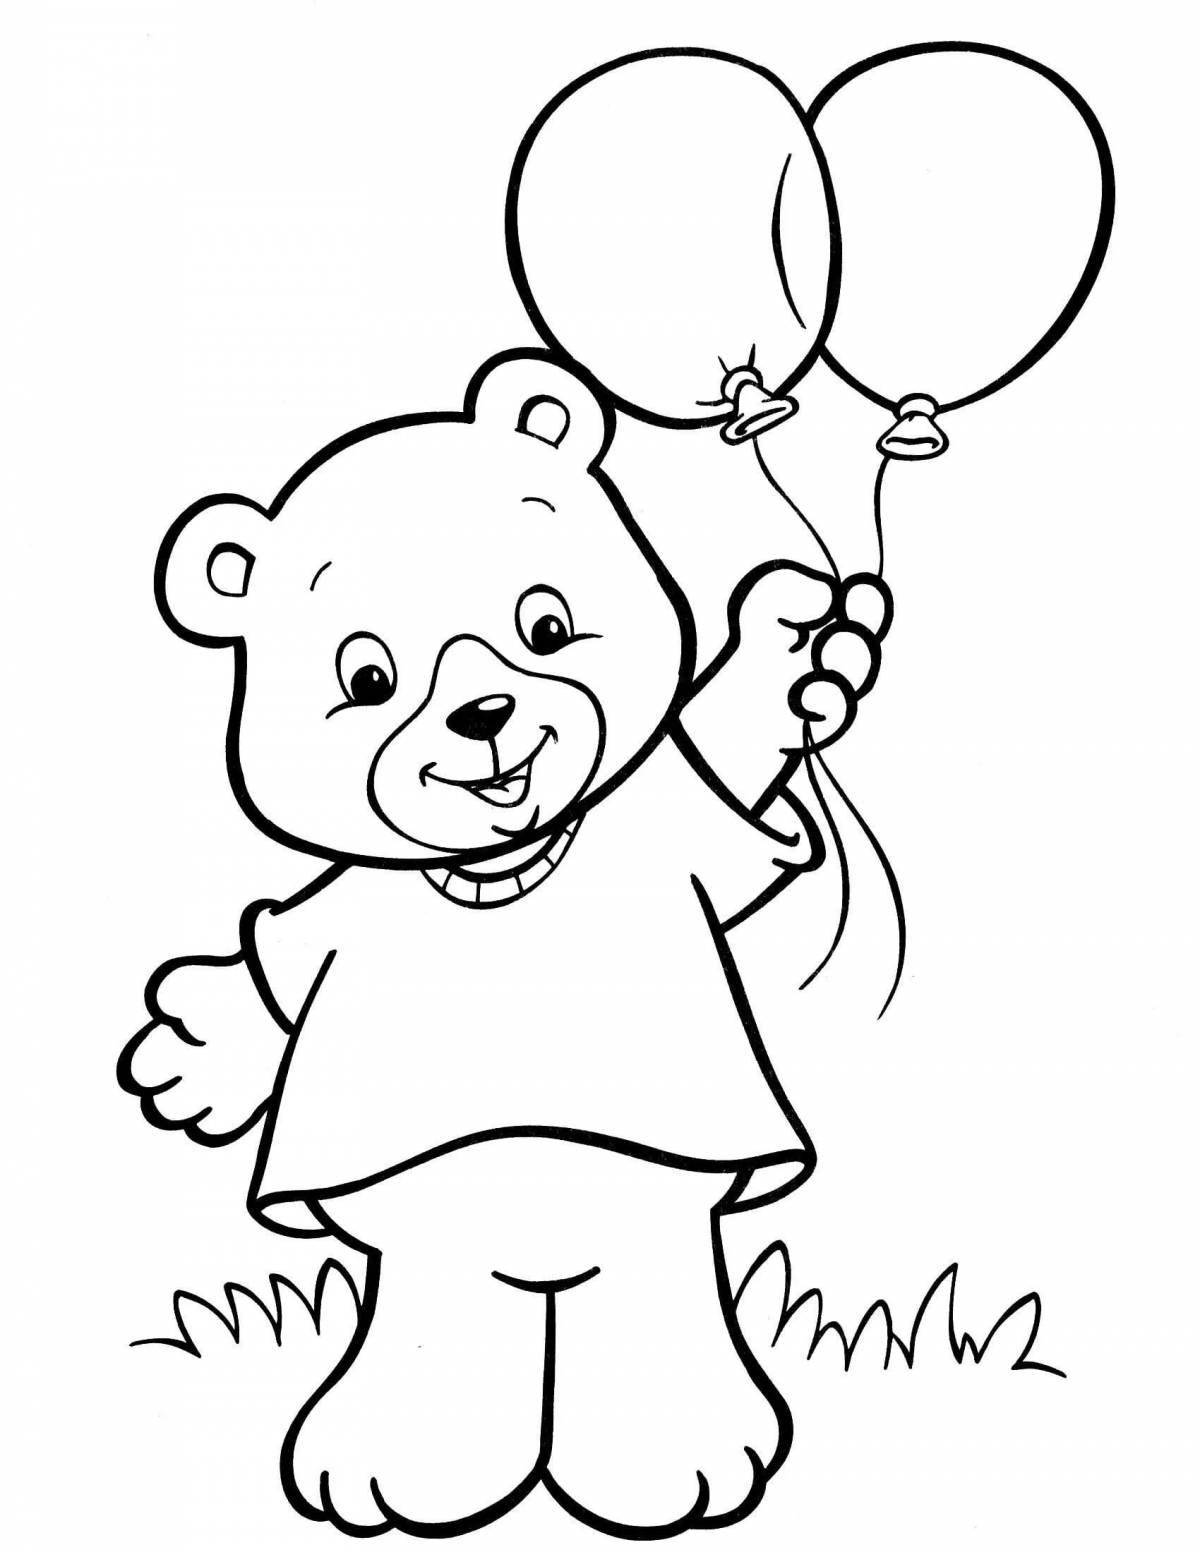 Enthusiastic bear with balloons